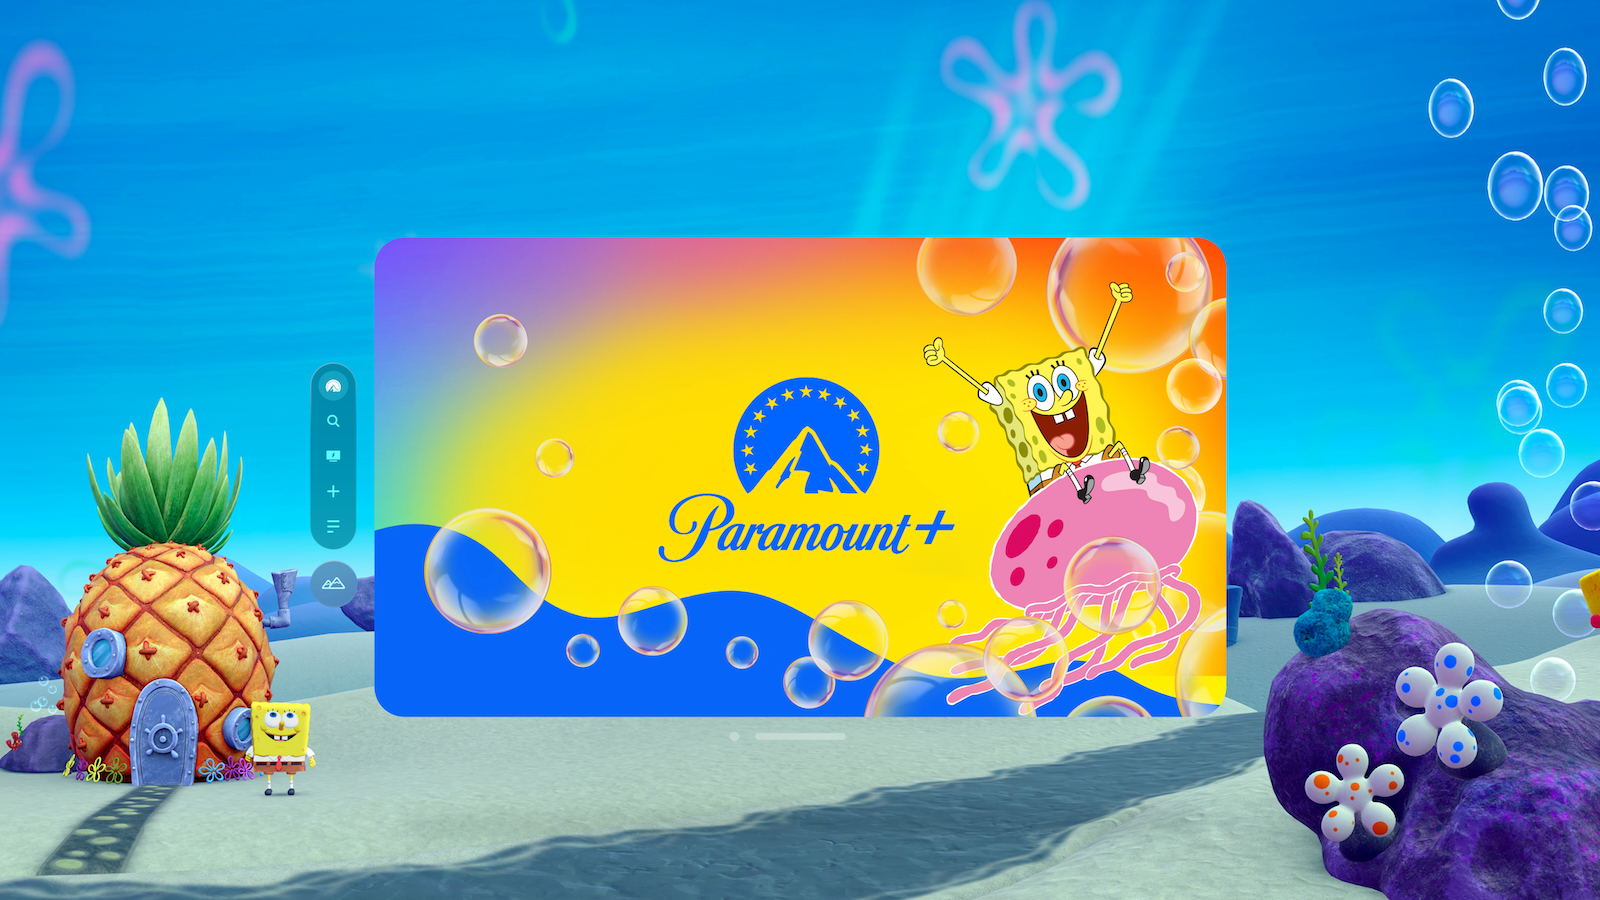 SpongeBob SquarePants Environment Now Available in Paramount+ App on Apple Vision Pro